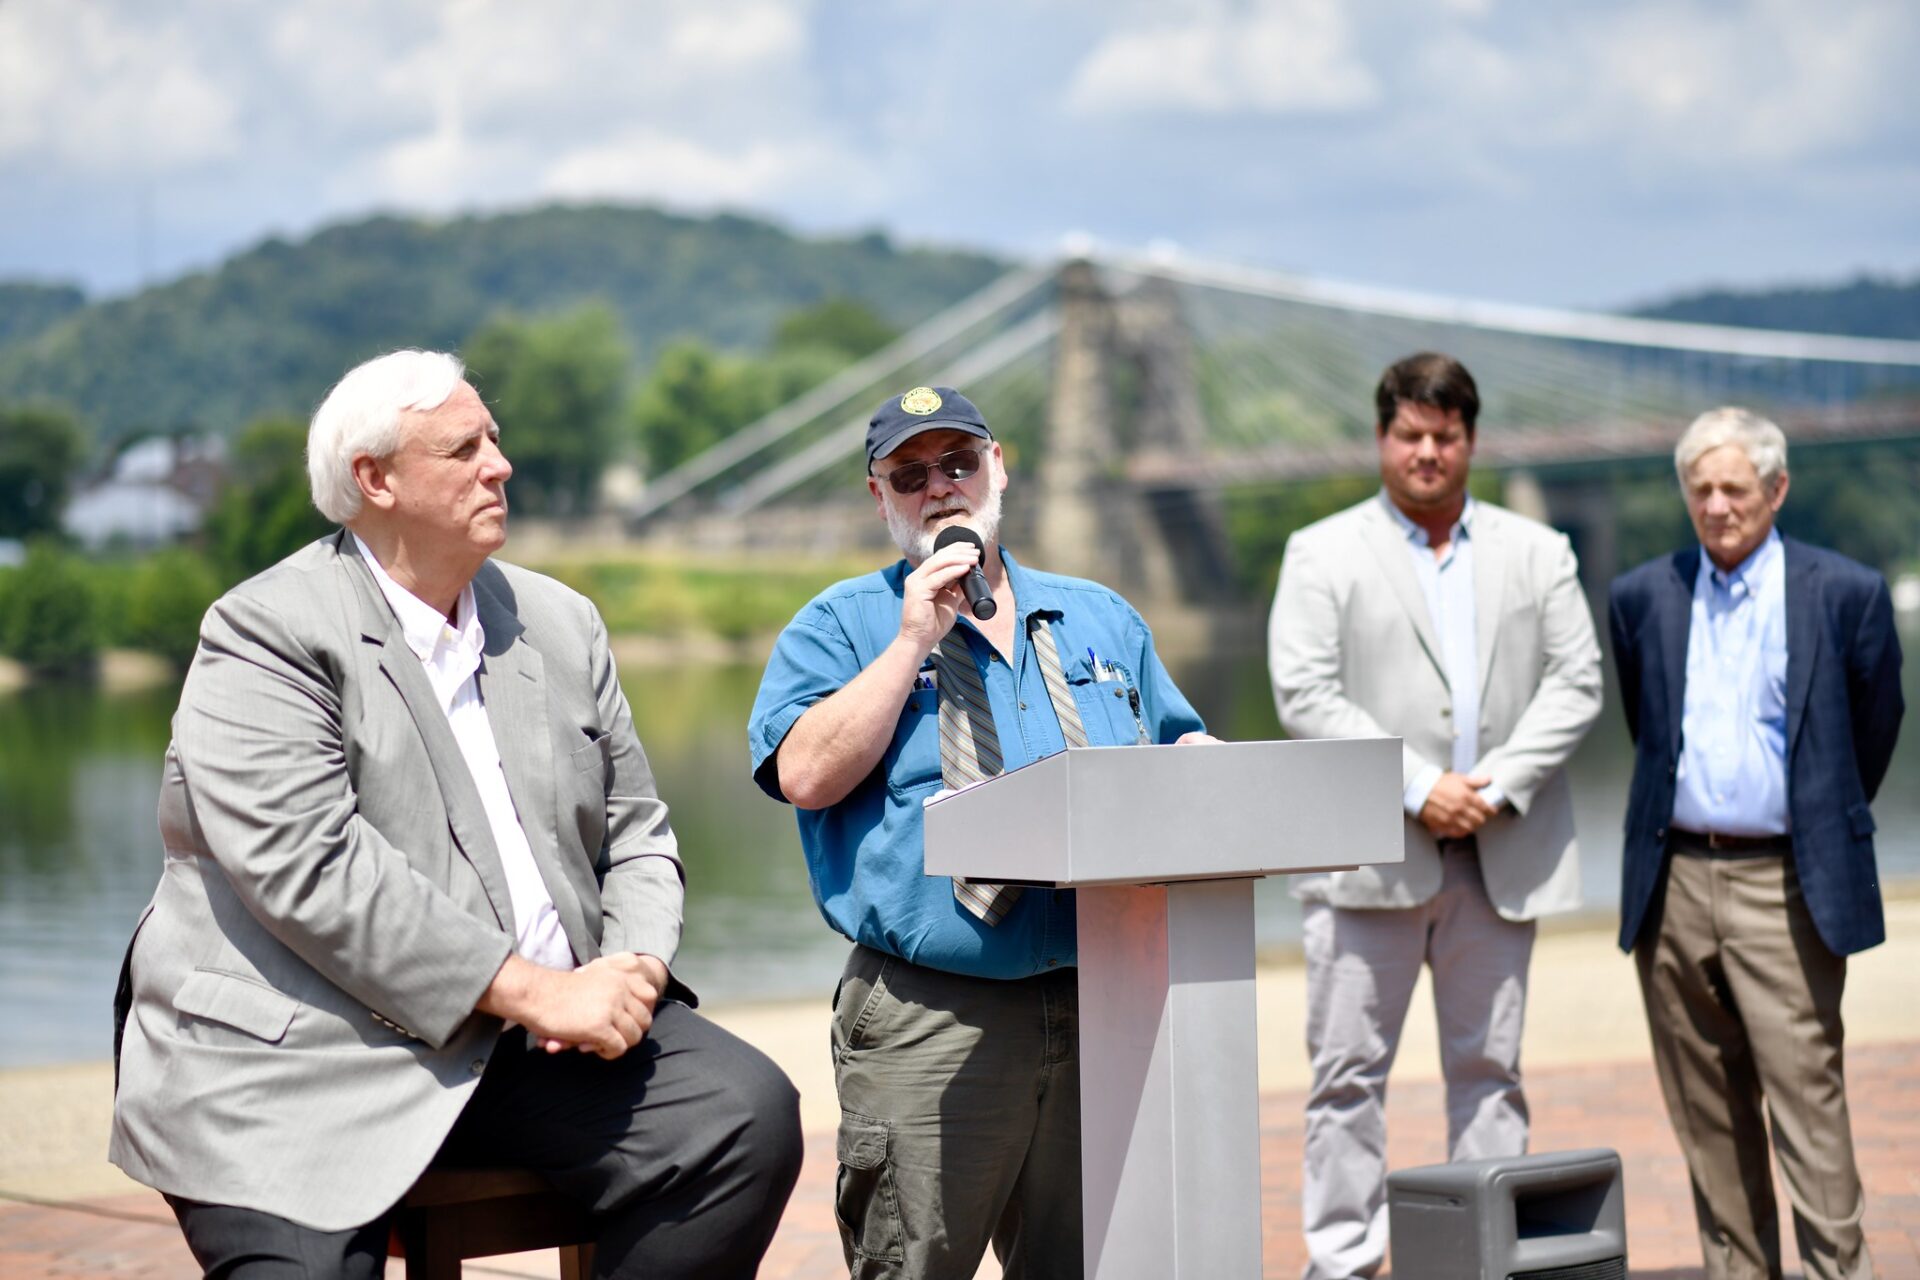 Justice, Officials Cut Ribbon On I-70 Bridges Project In Wheeling